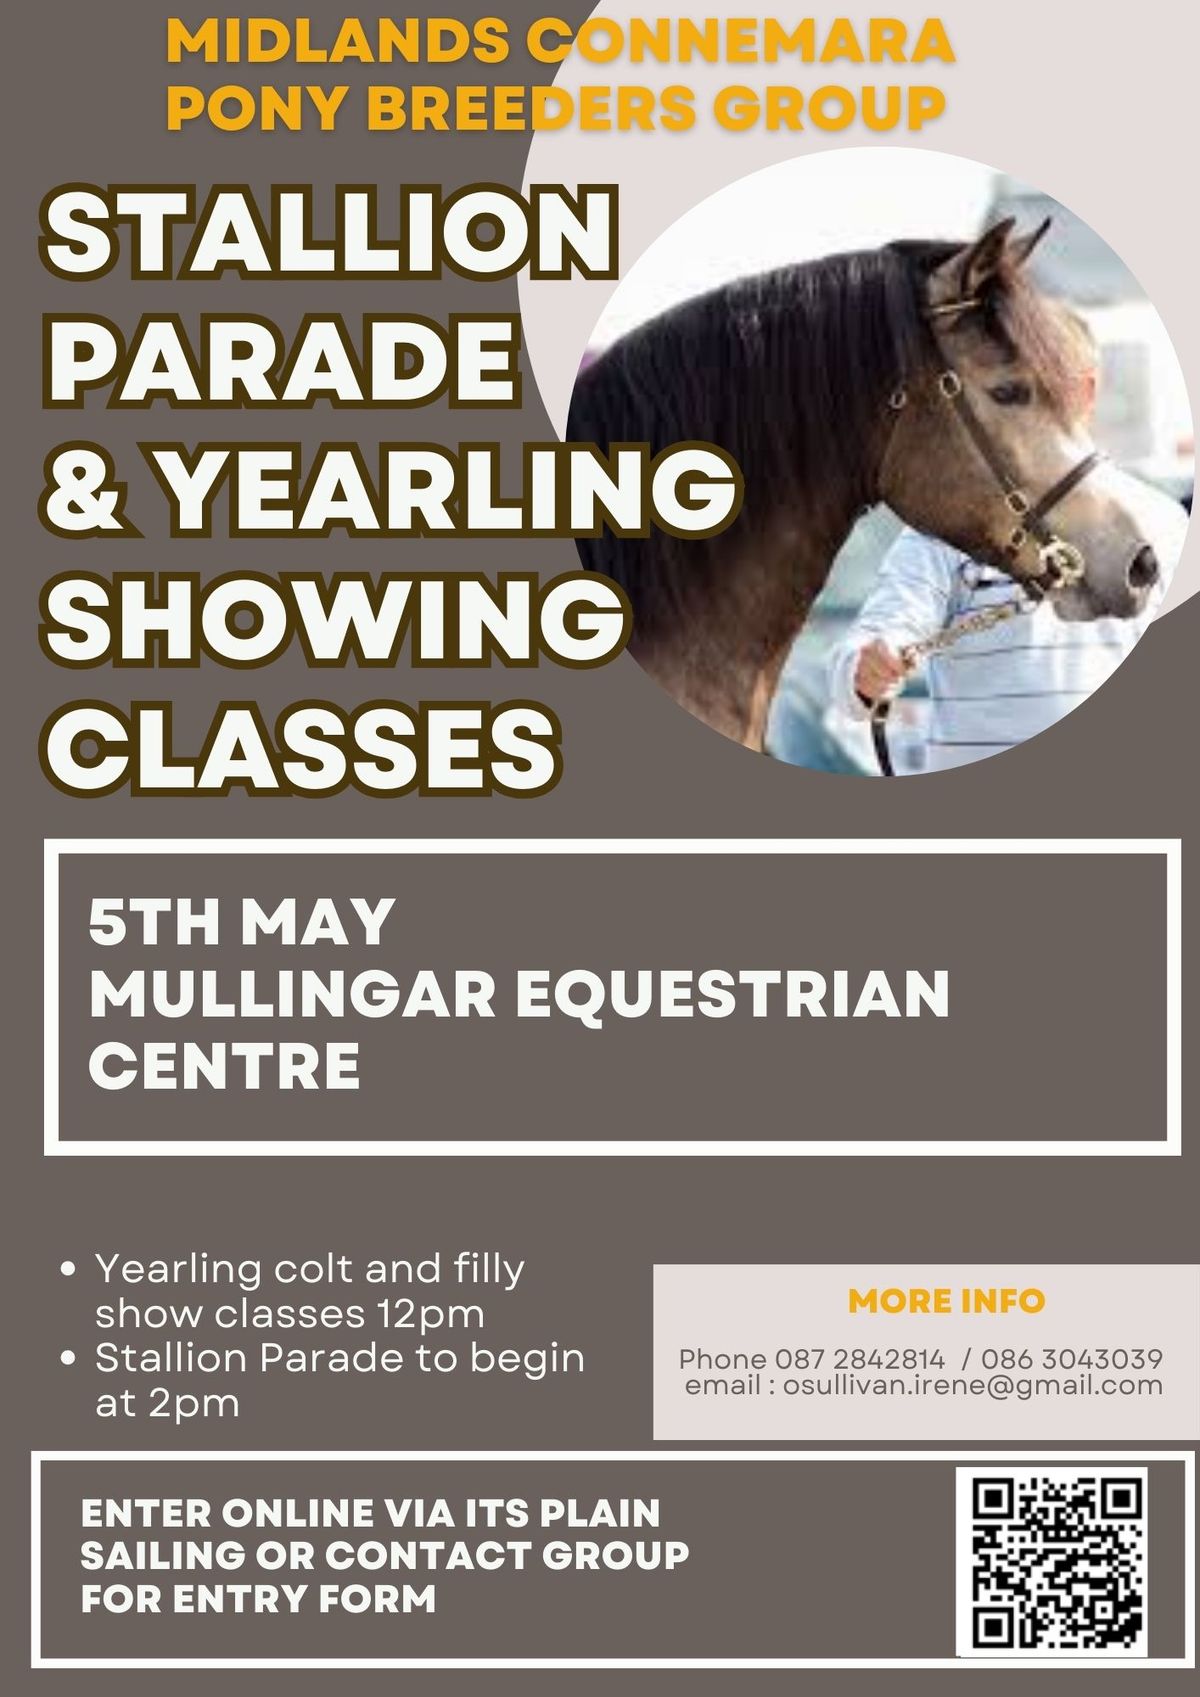 Stallion Parade and Yearling Showing Classes